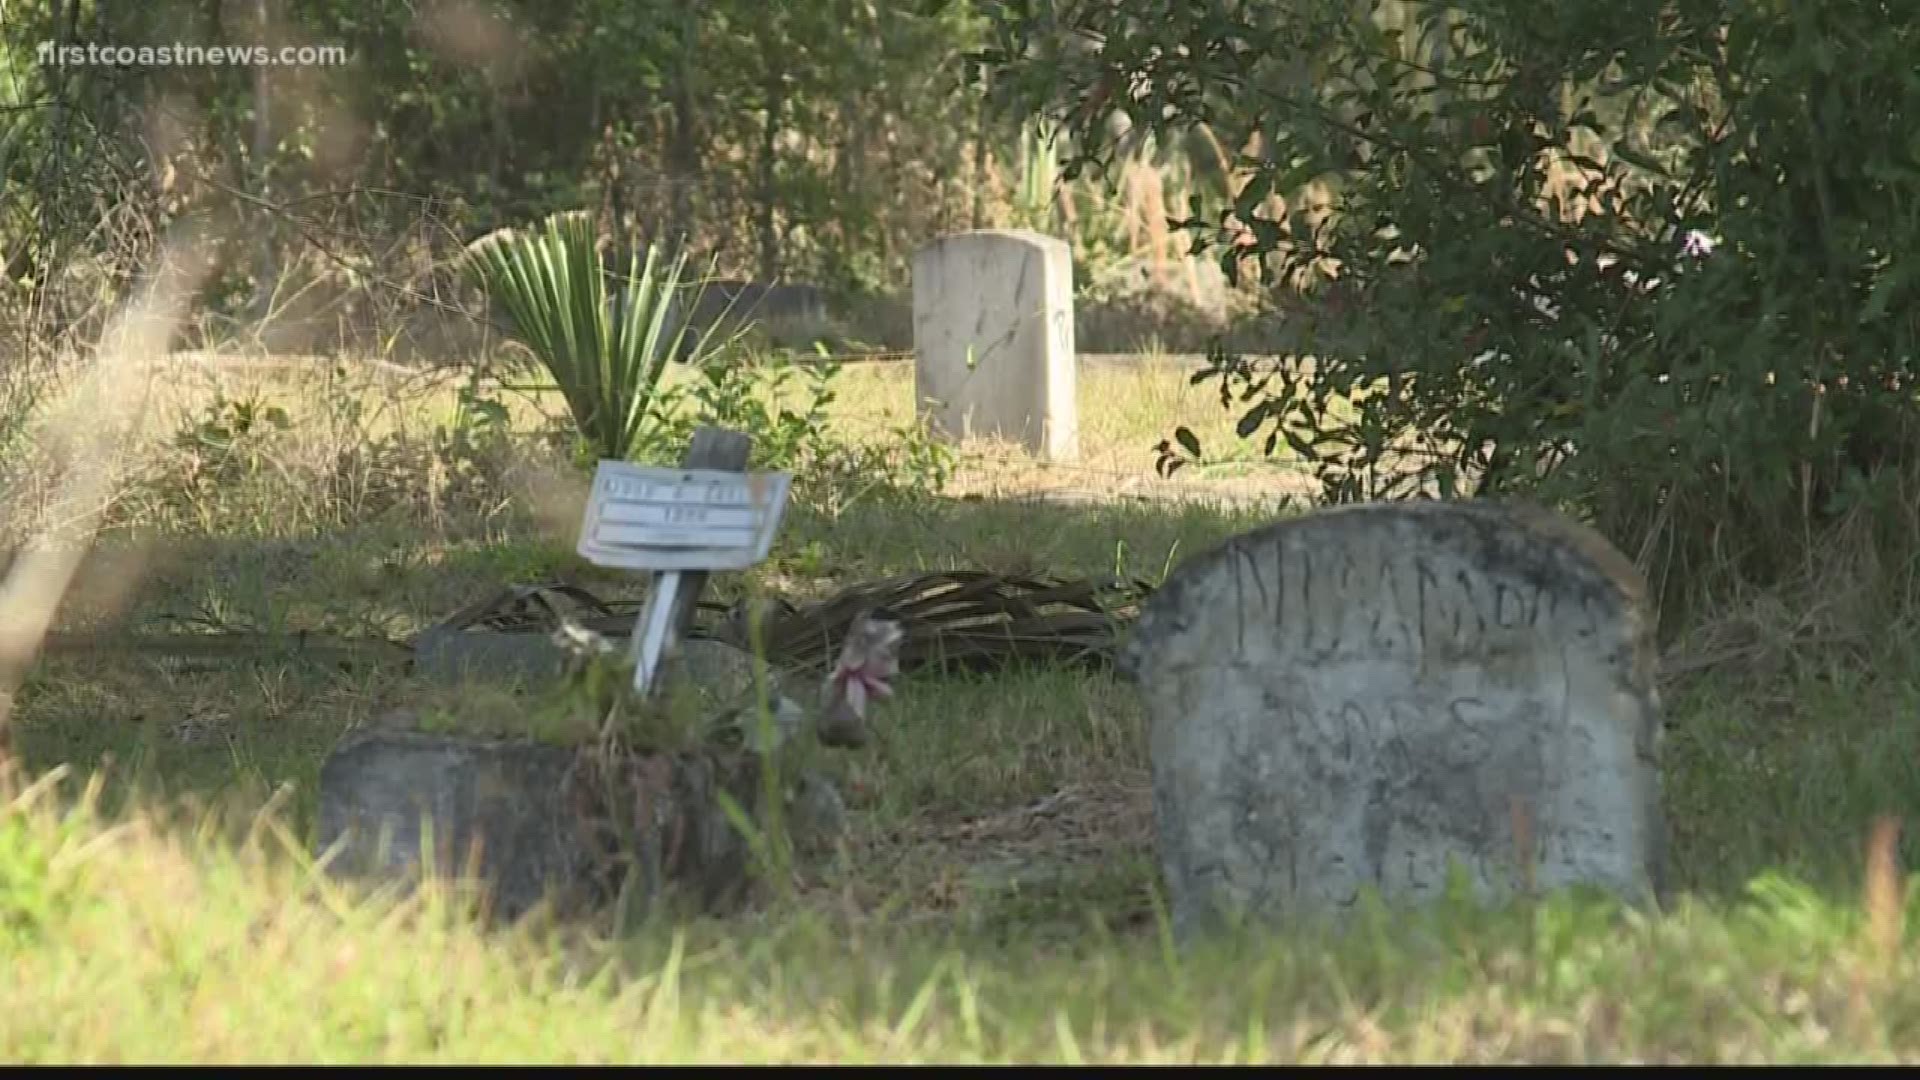 Nearly 30 ago, a St. Augustine woman bought a gravesite next to her husband. Now that she is dying and making preparations, she discovered that she can't be buried there.